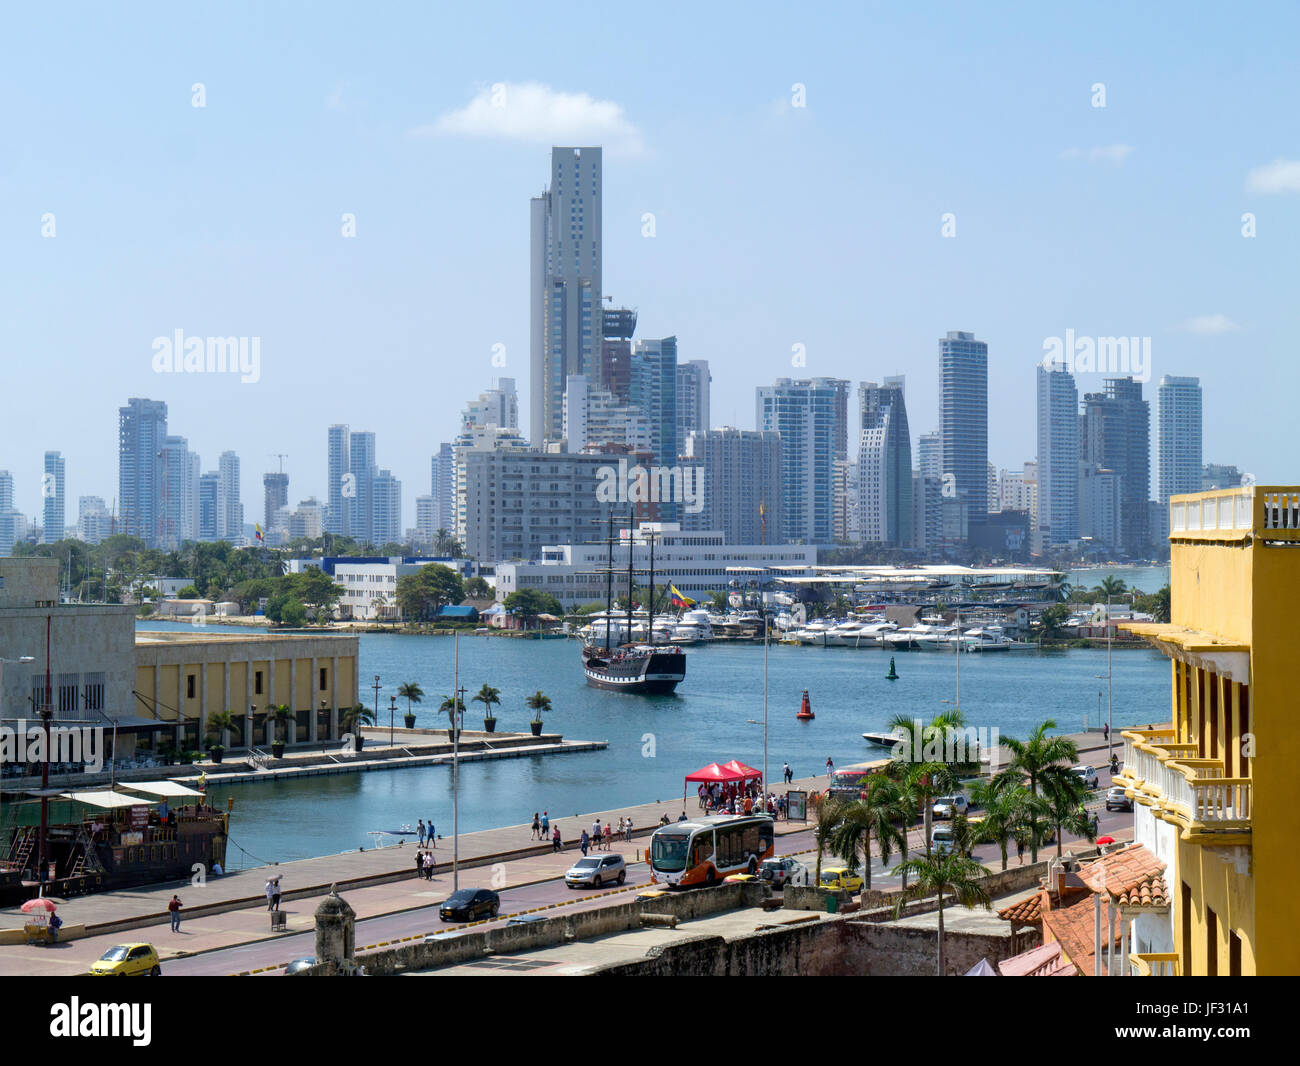 View of modern district of Bocagrande across water with sailing ship from rooftop in Plaza de los Coches, old town, Cartegena, Colombia Stock Photo